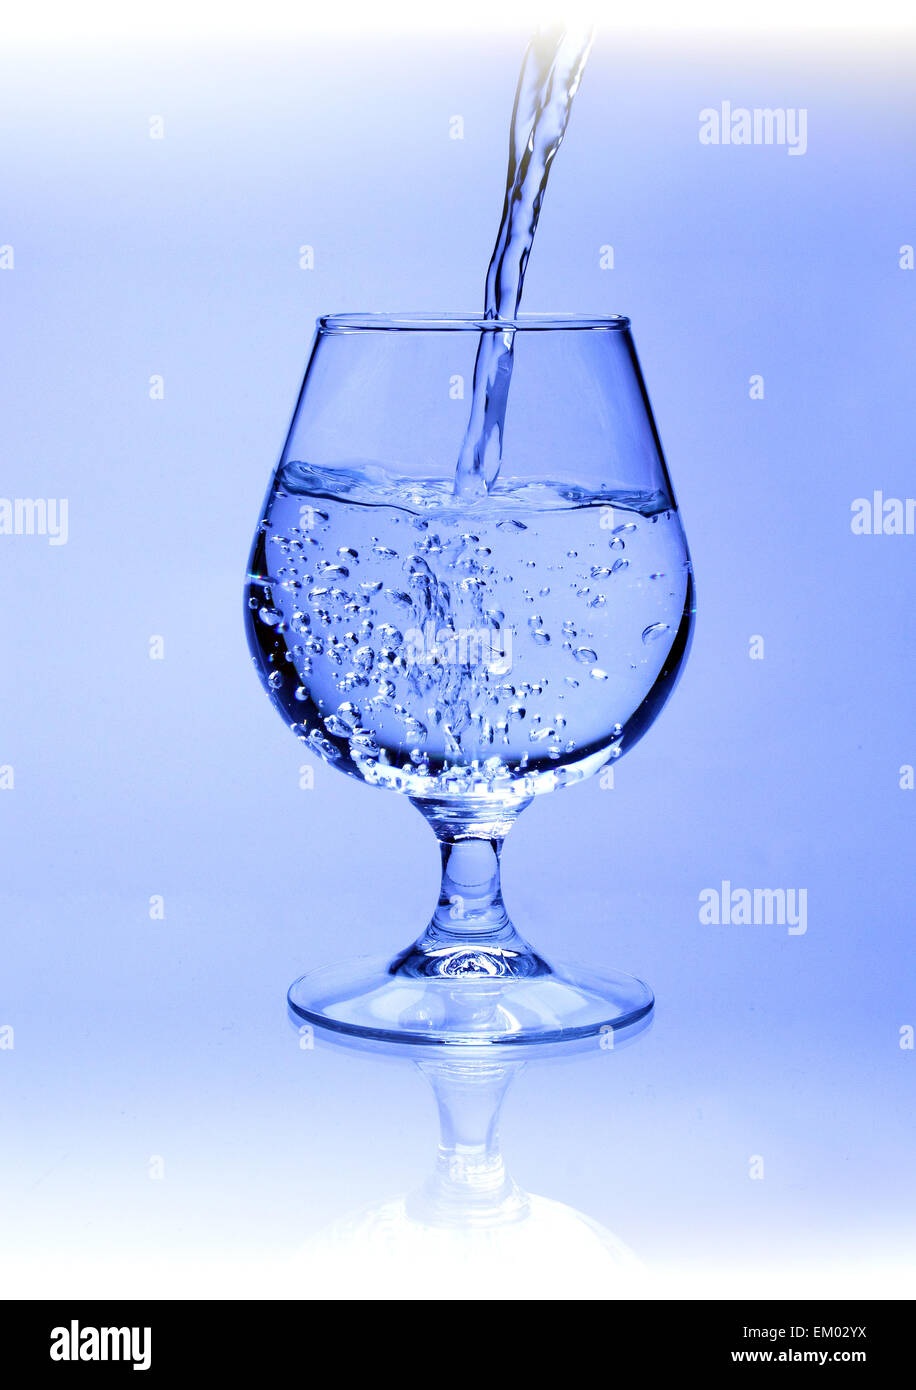 Pure drink Stock Photo